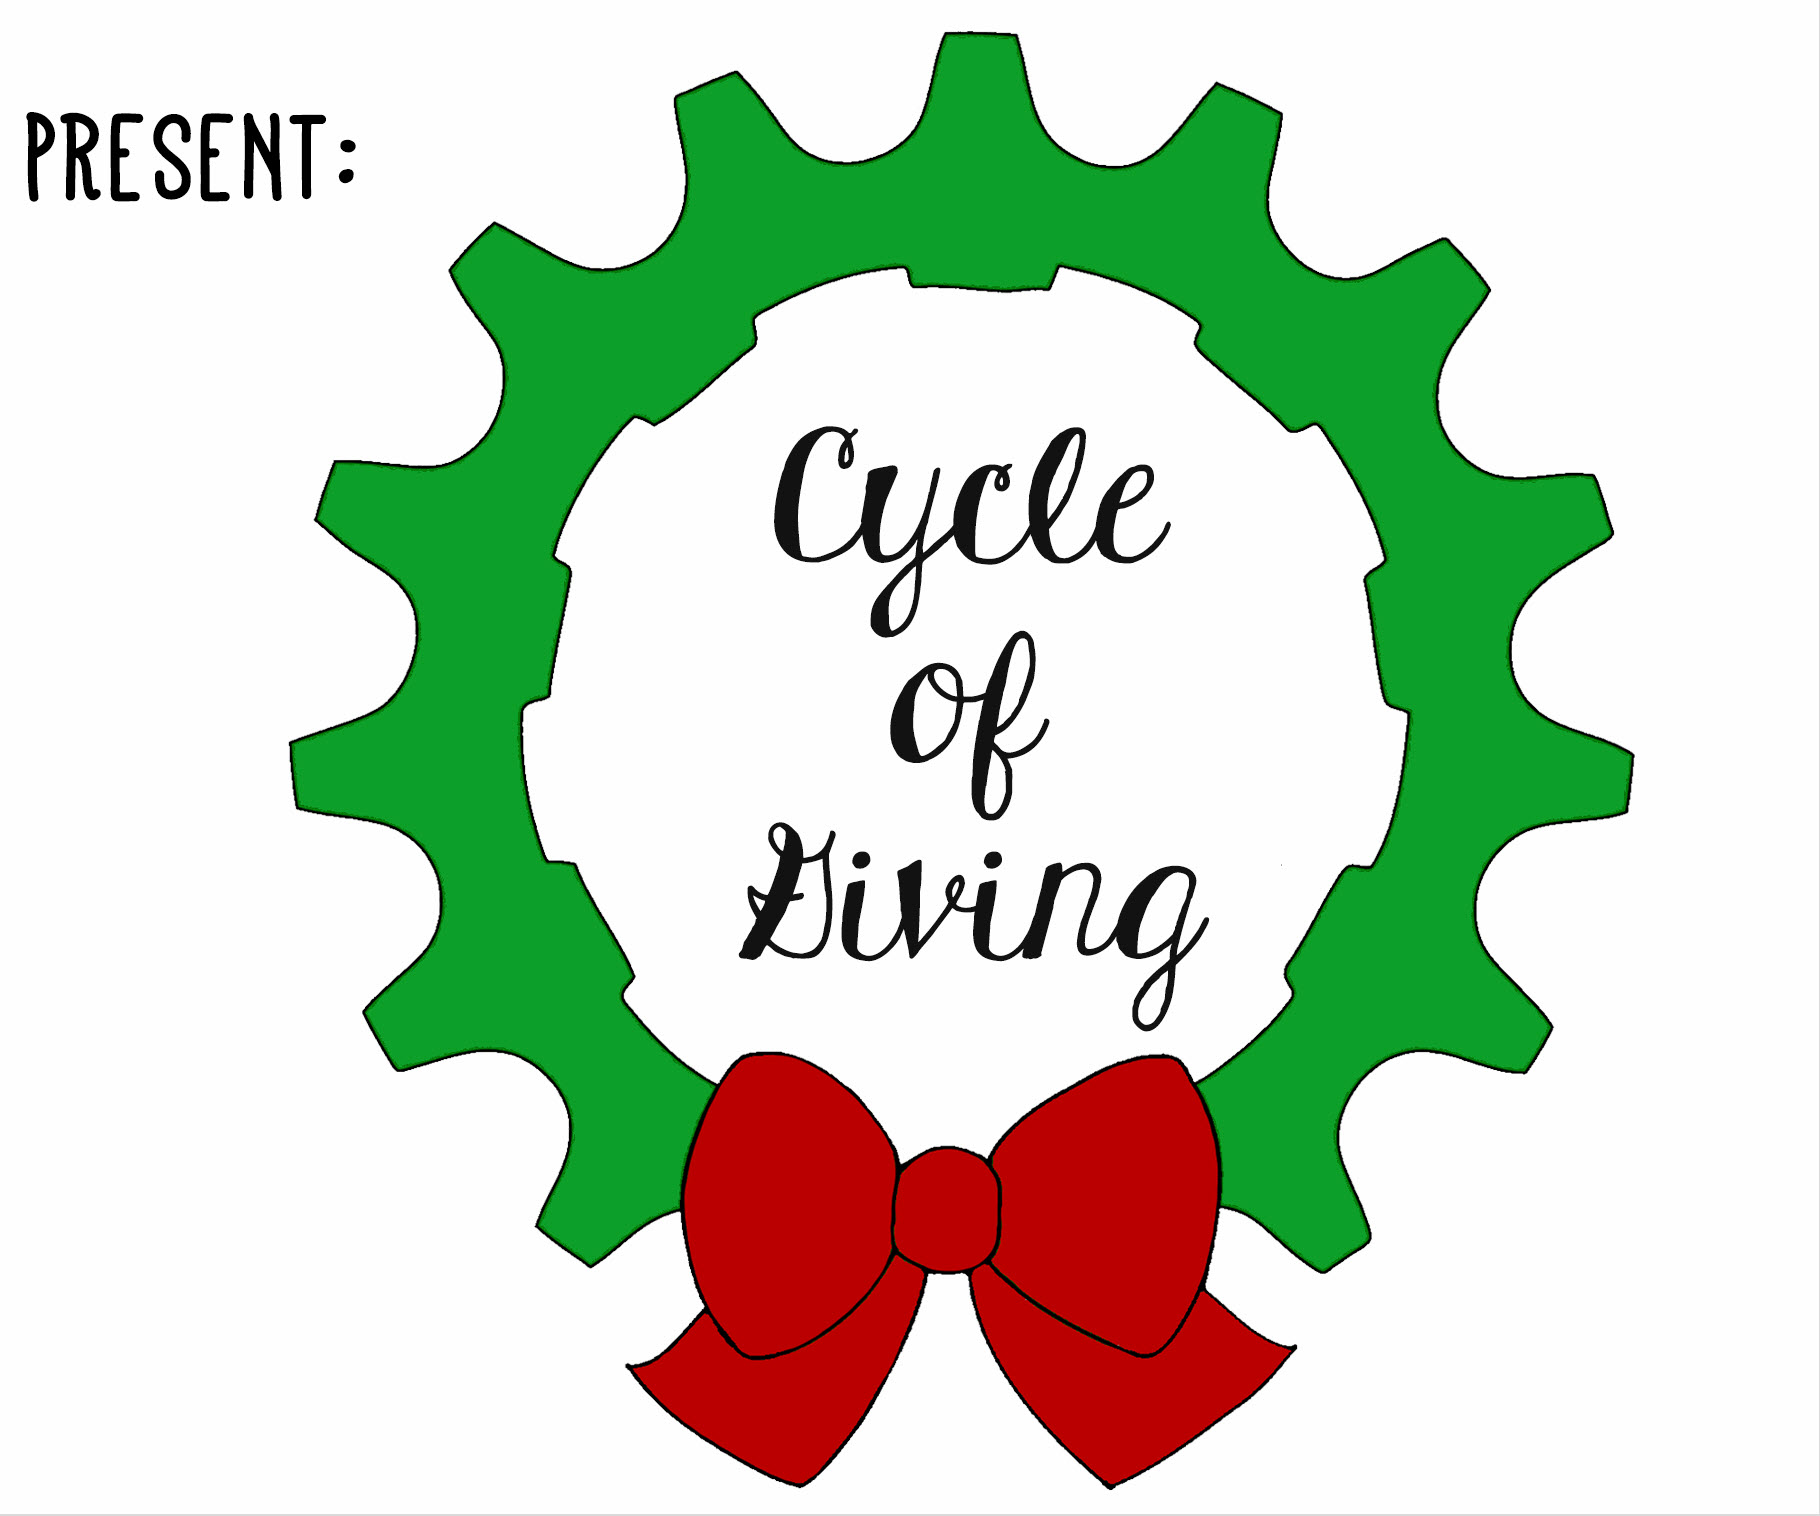 5th Annual Cycle of Giving